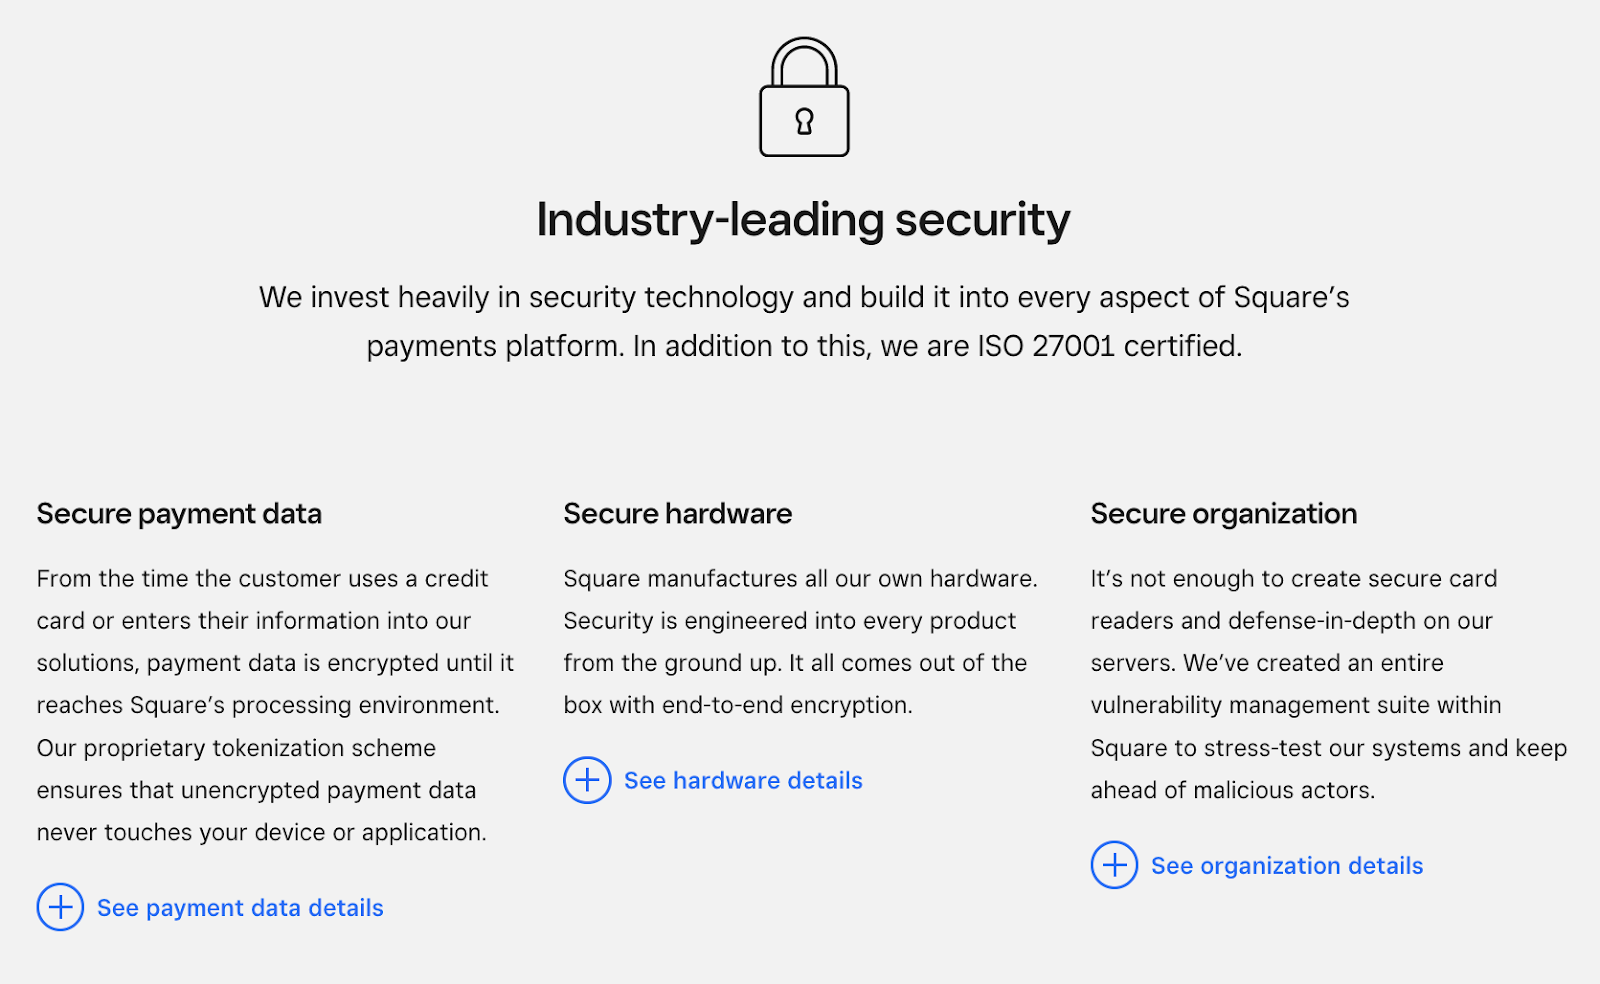 Square's security features including secure payment data, secure hardware, and secure organization